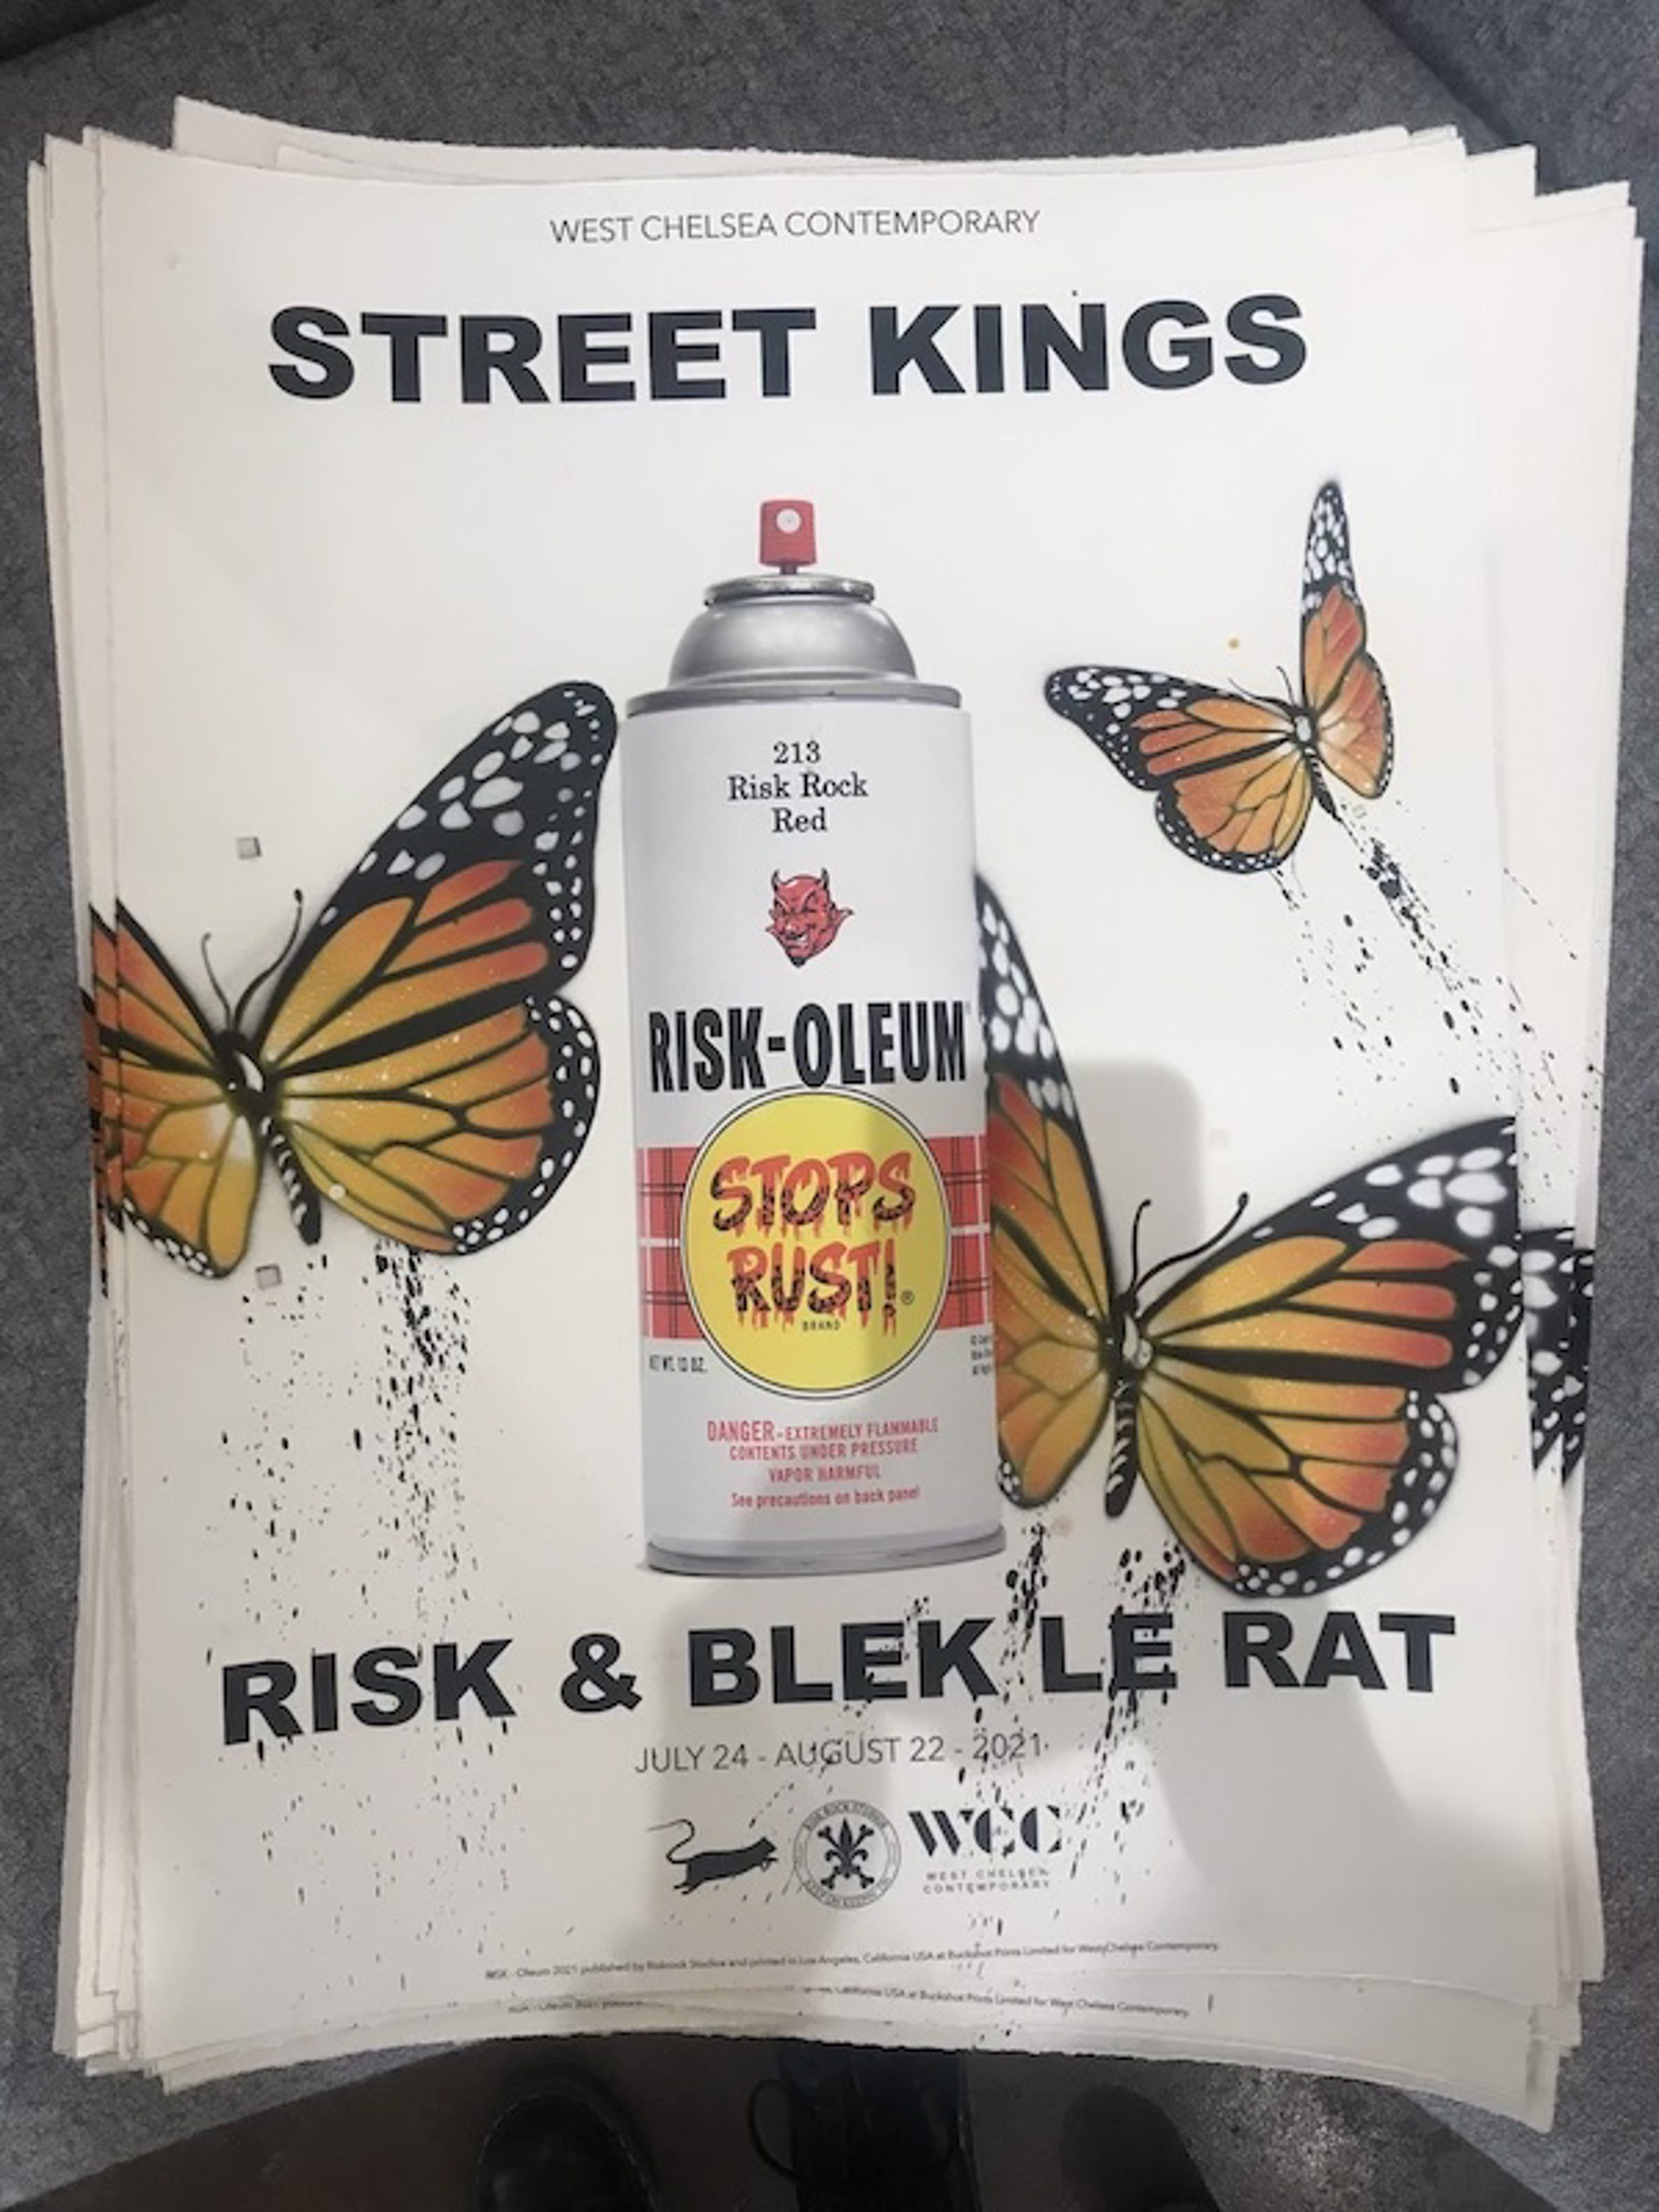 Street Kings Show Print (40/50) by Risk